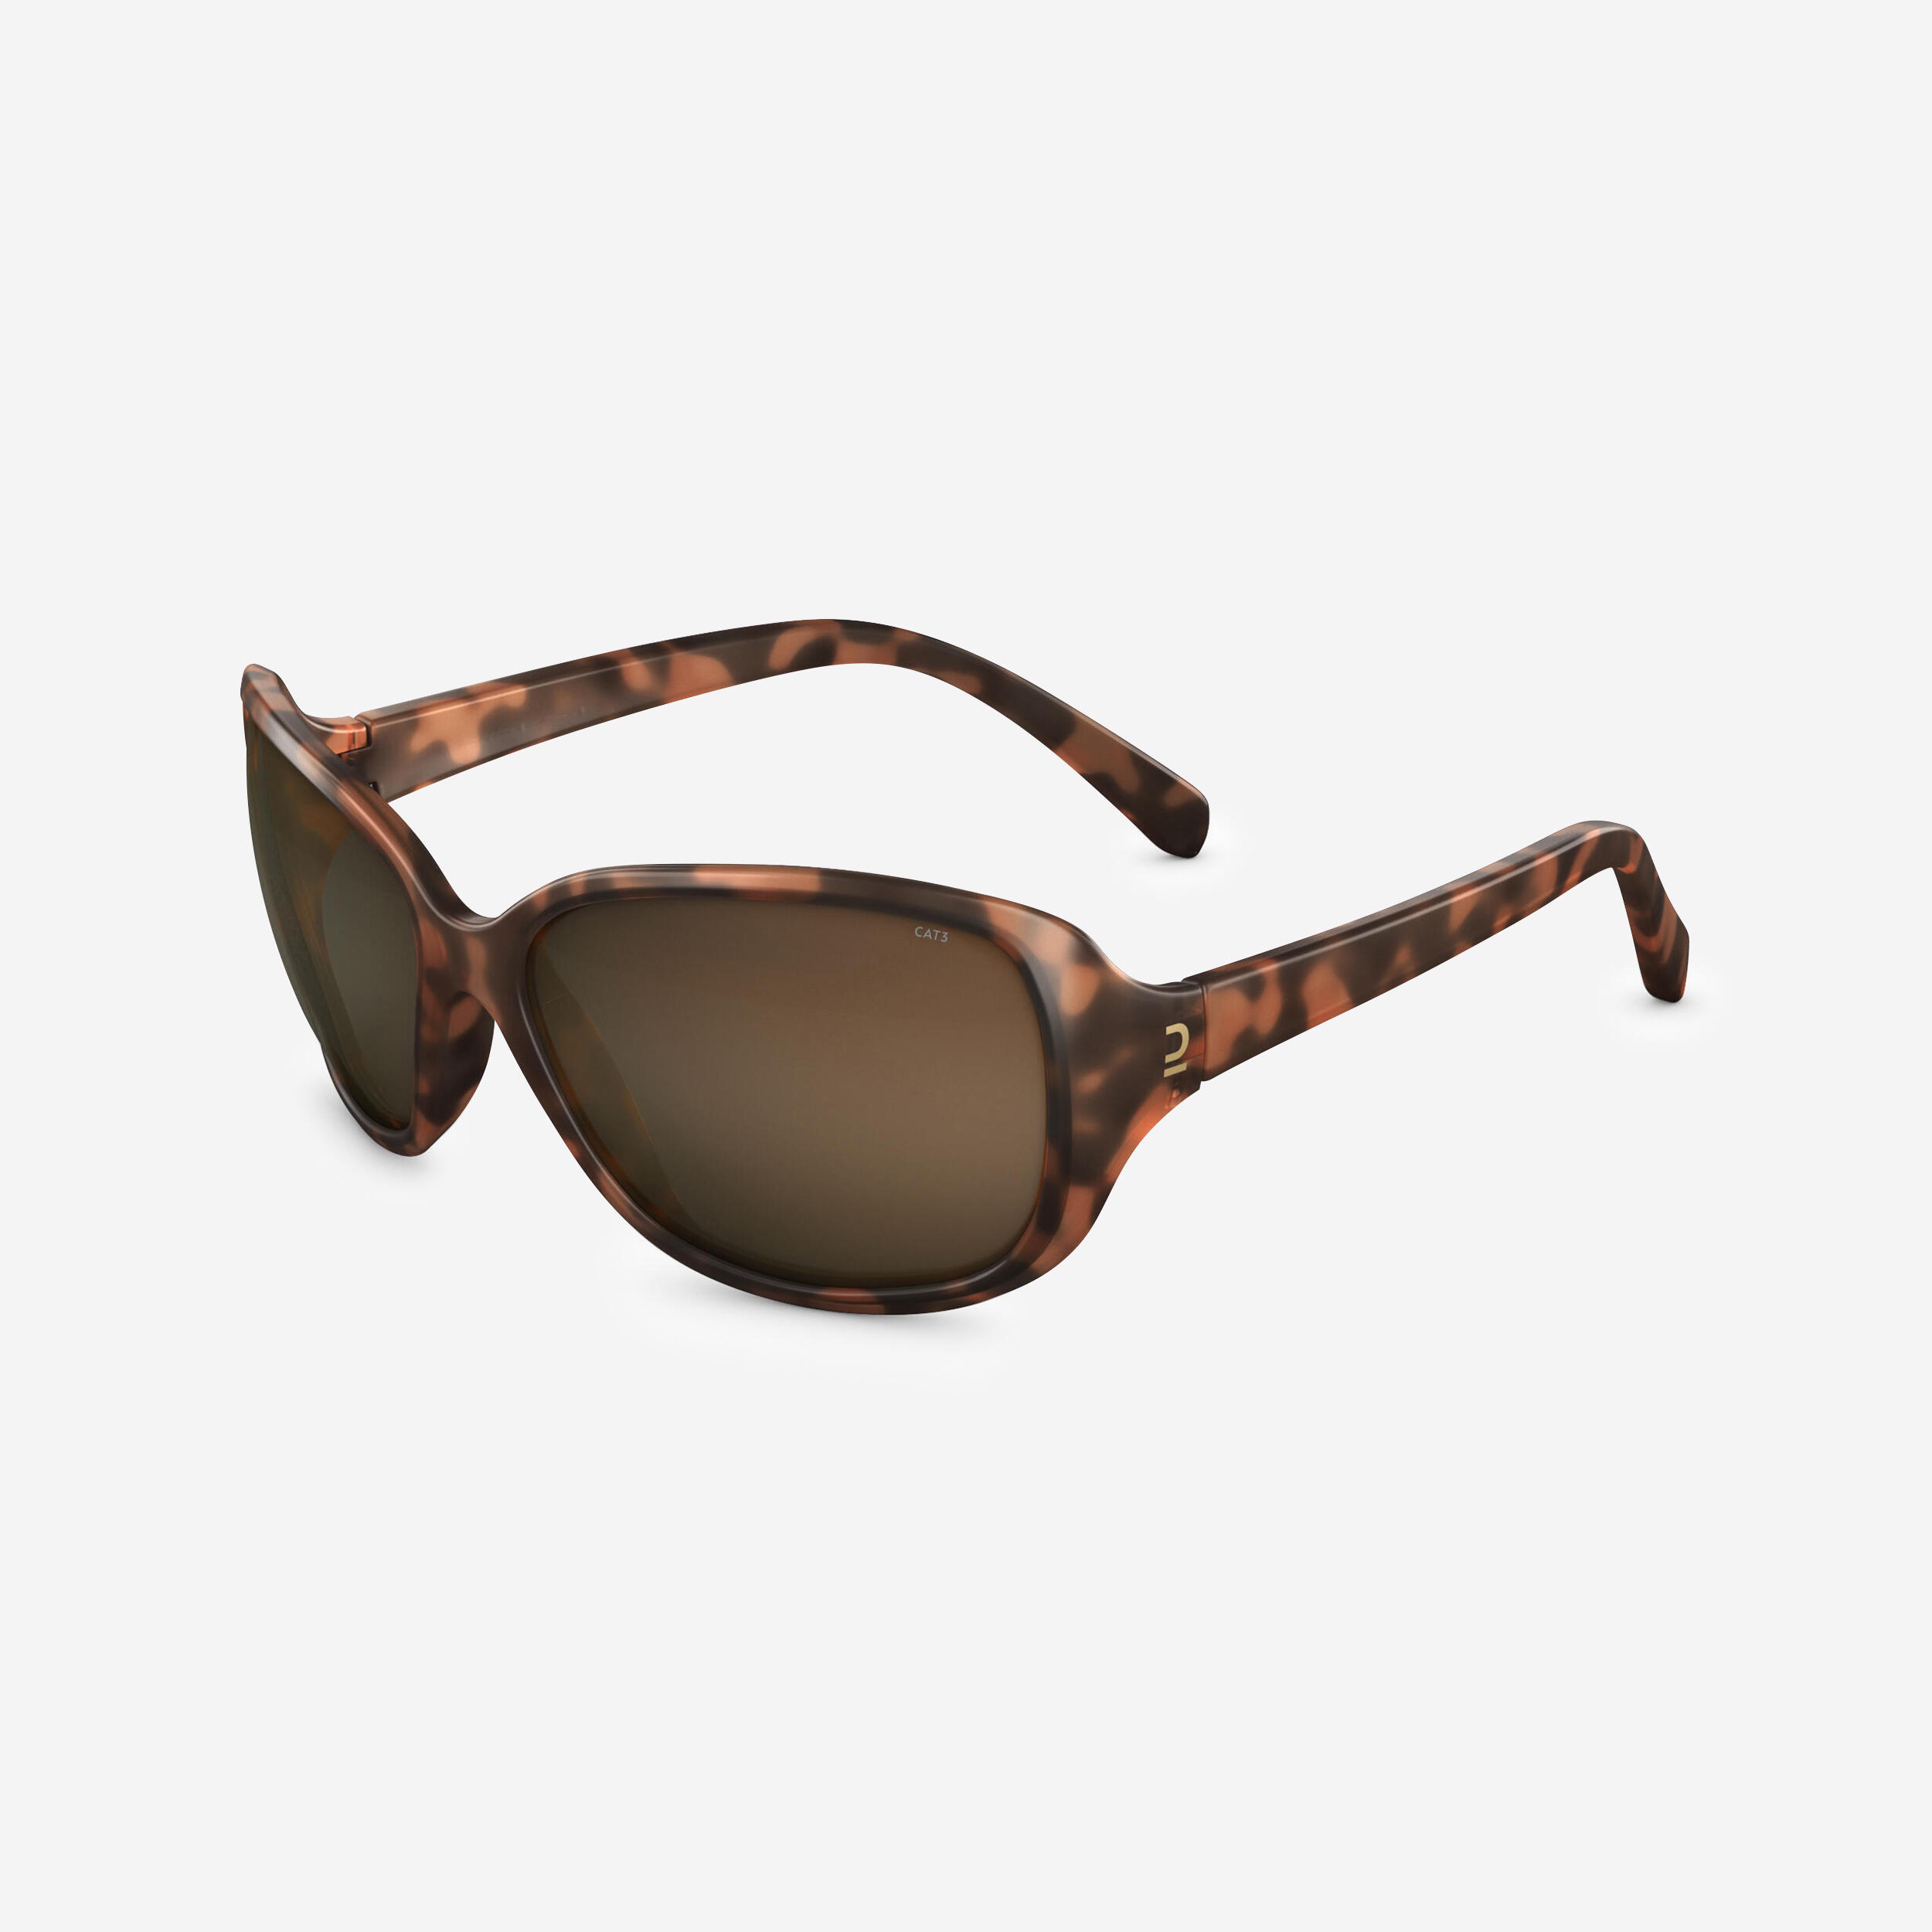 Image of MH530W Category 3 Hiking Sunglasses - Women